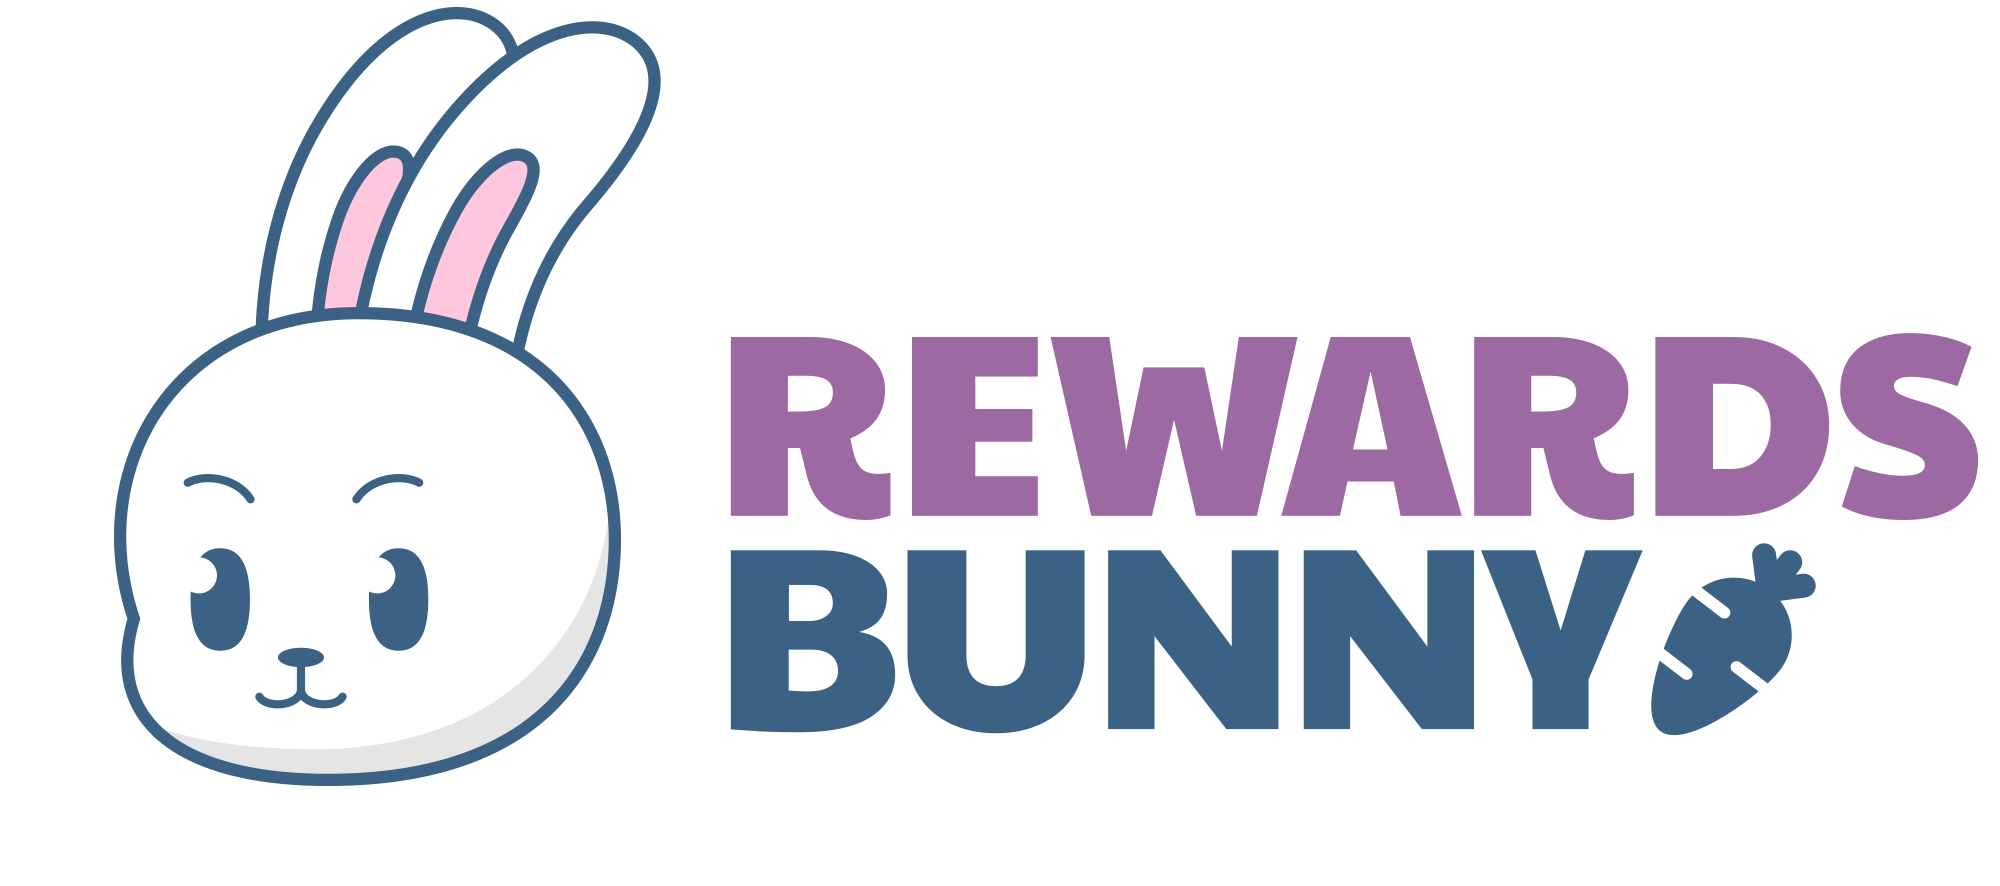 Rewards Bunny Announces Participation in Global Launch by 500 Global